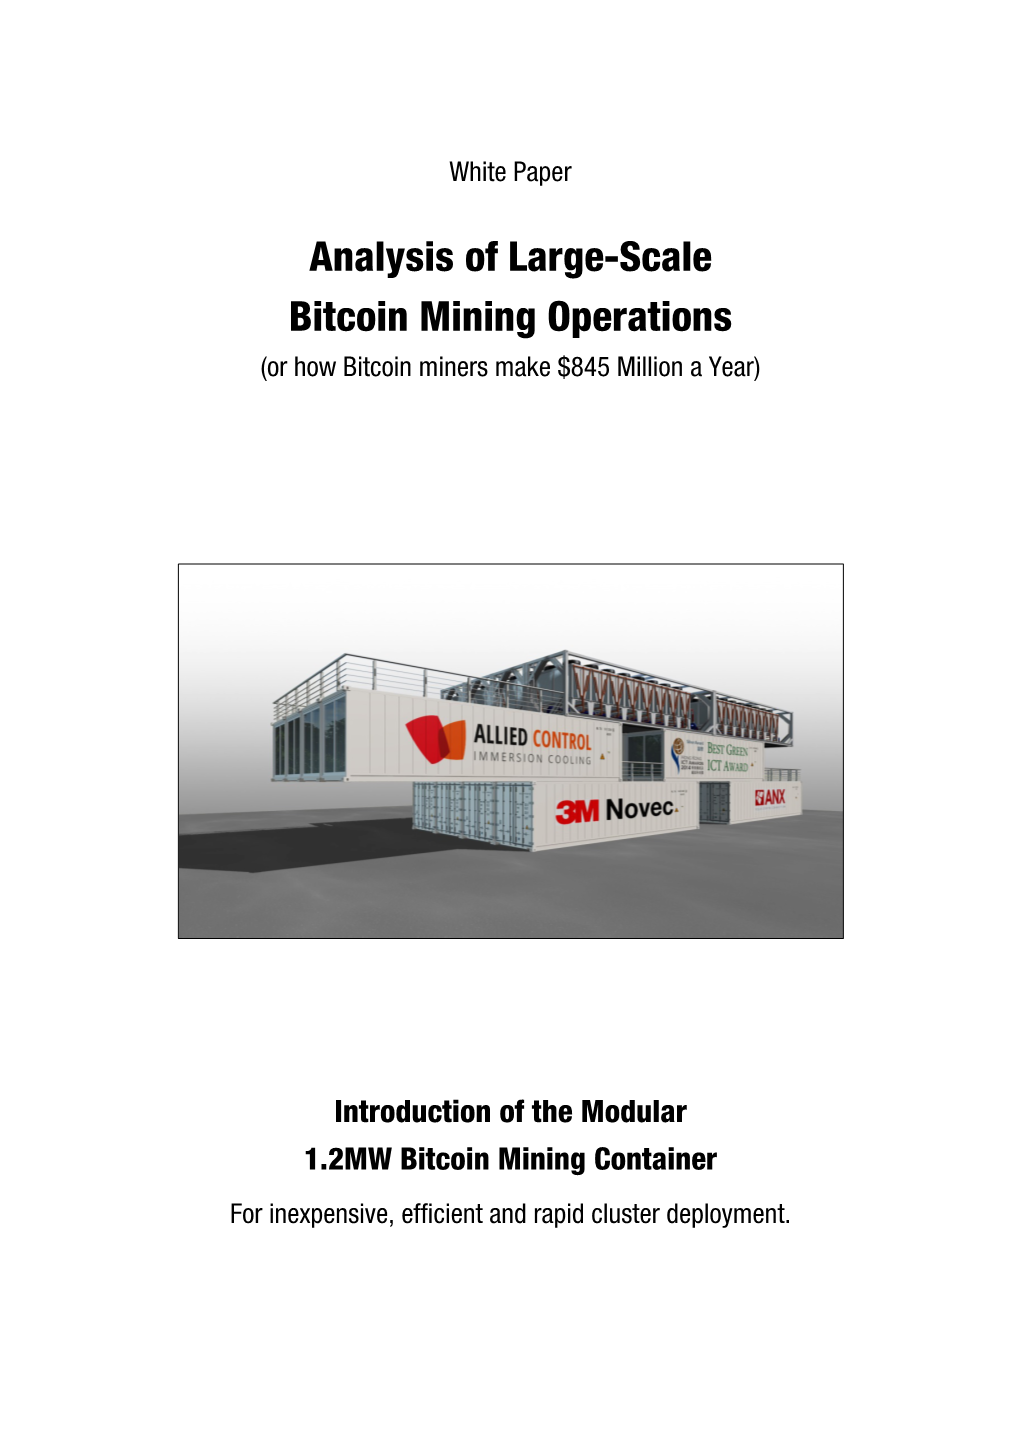 Analysis of Large-Scale Bitcoin Mining Operations